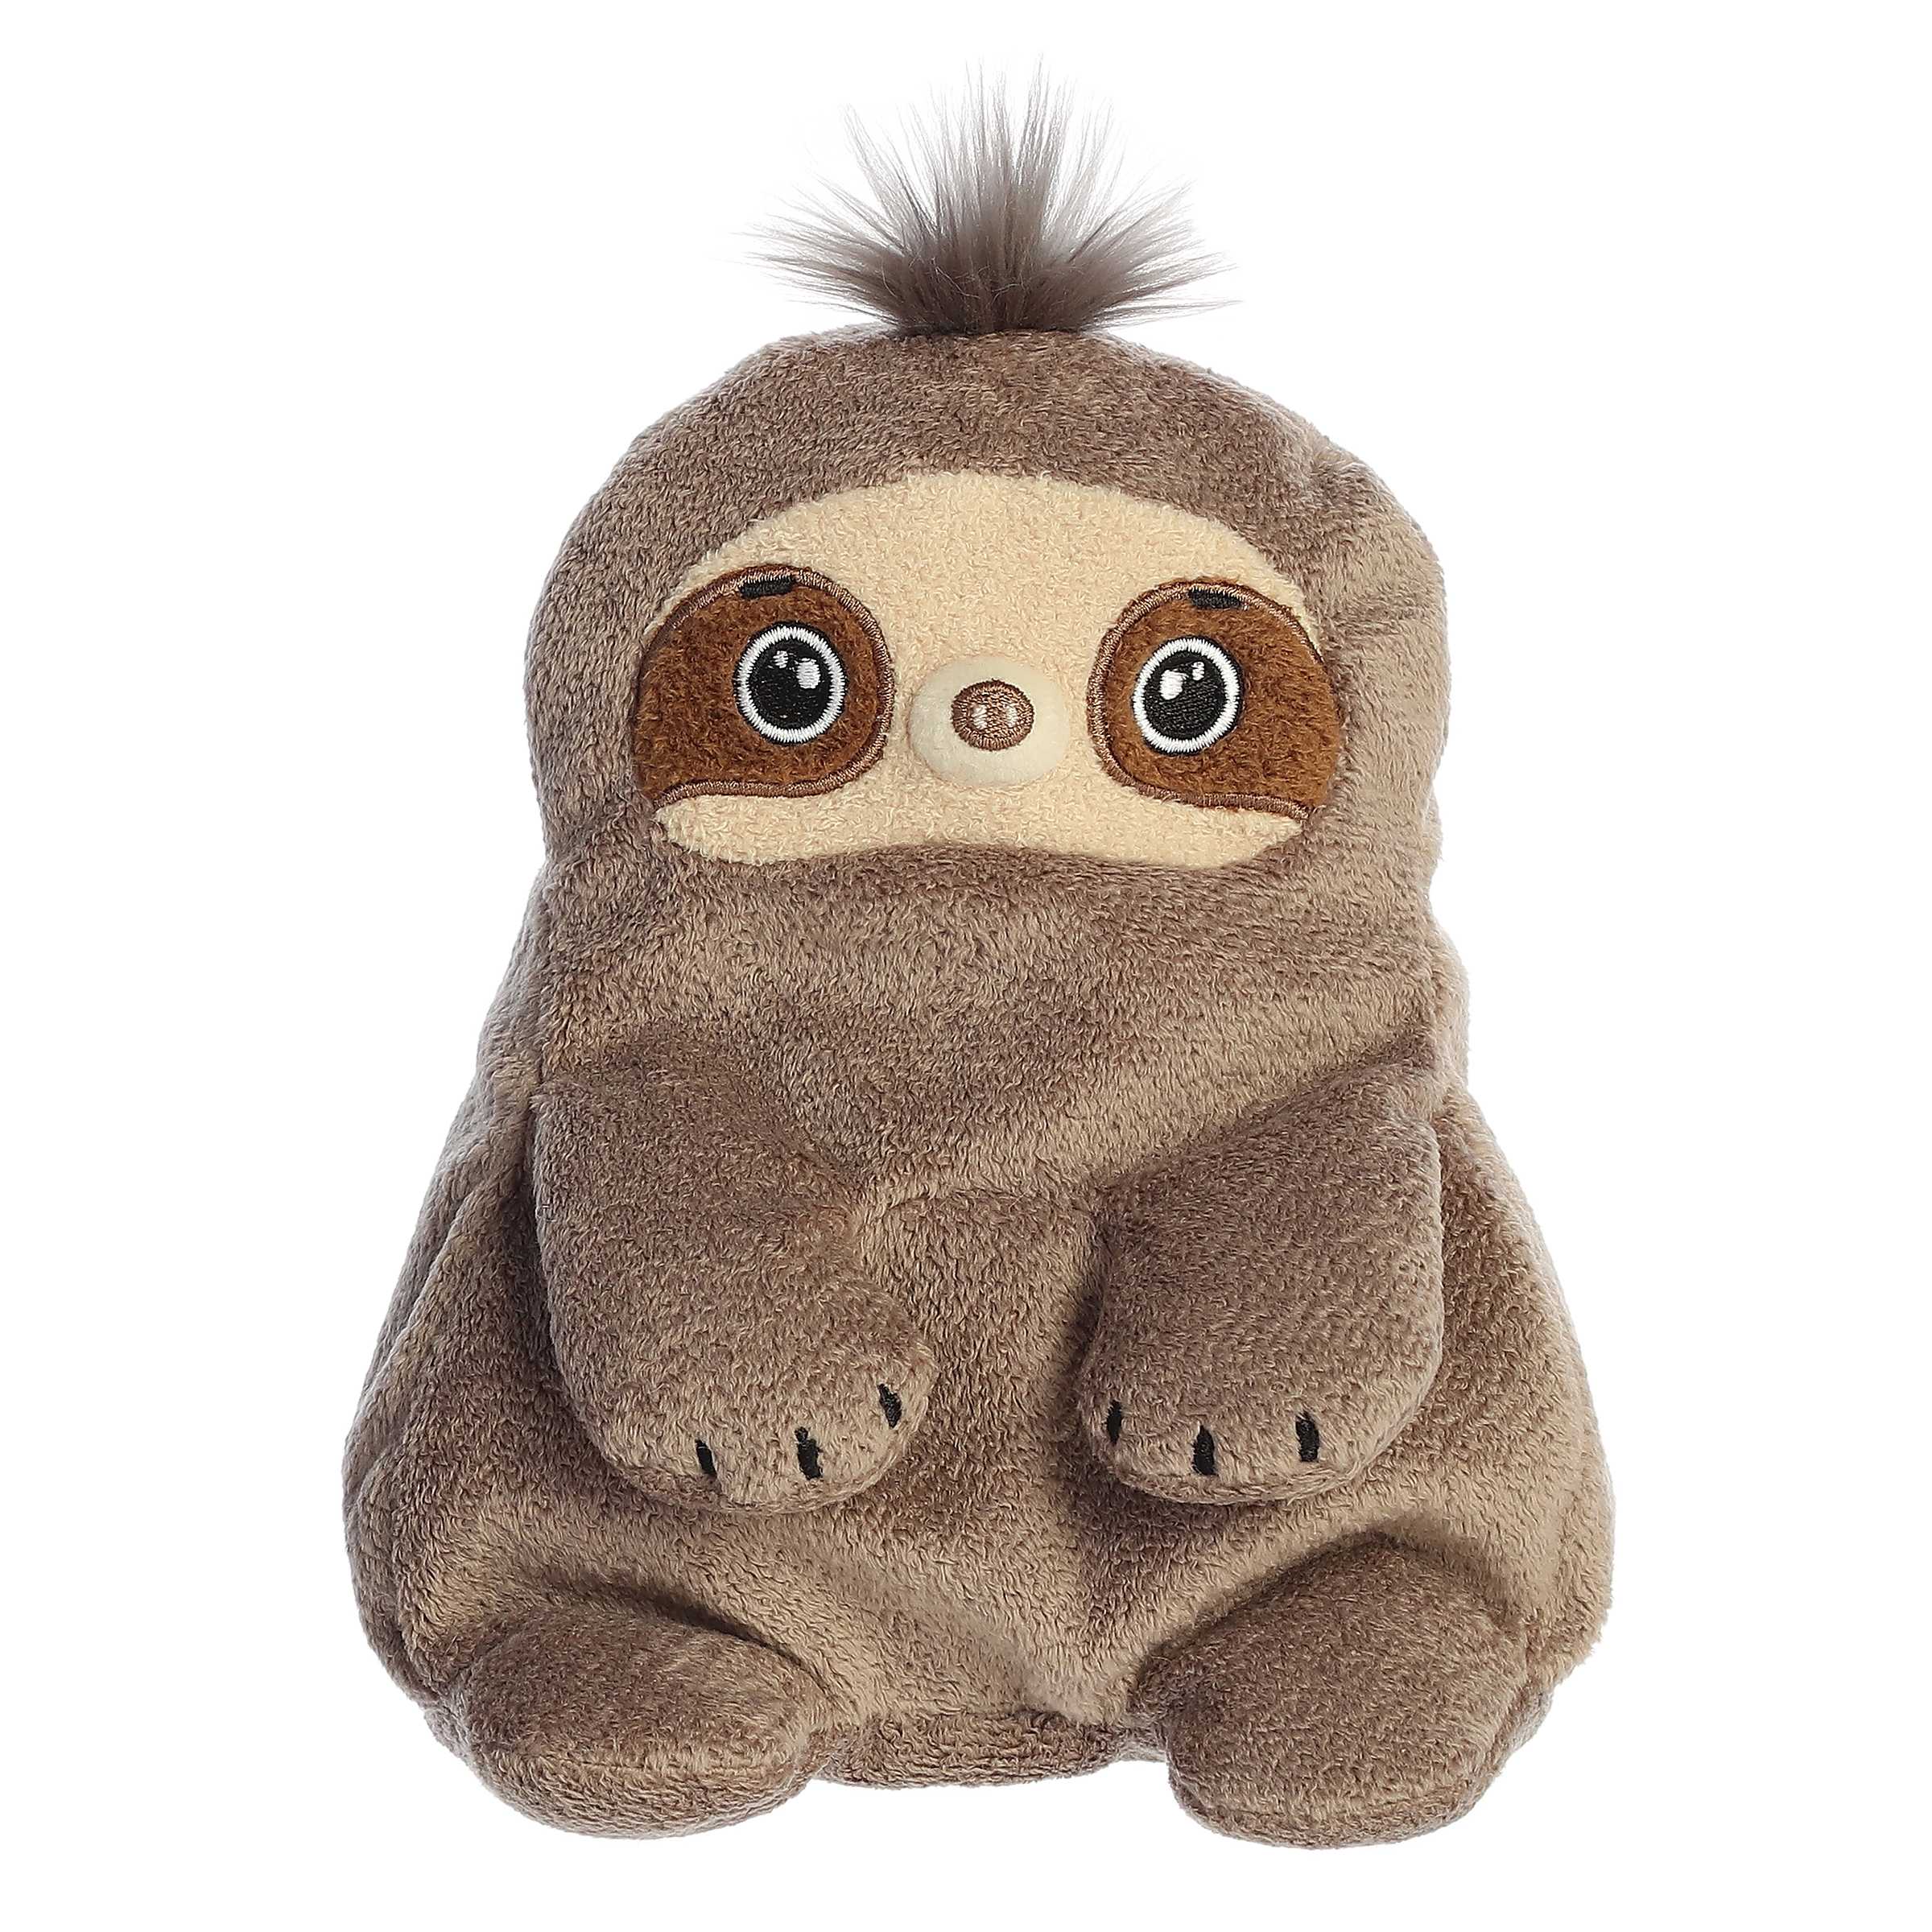 Sammi Sloth from Fluffles, a soft, cuddly plush with an endearing expression, perfect for affection and comfort.